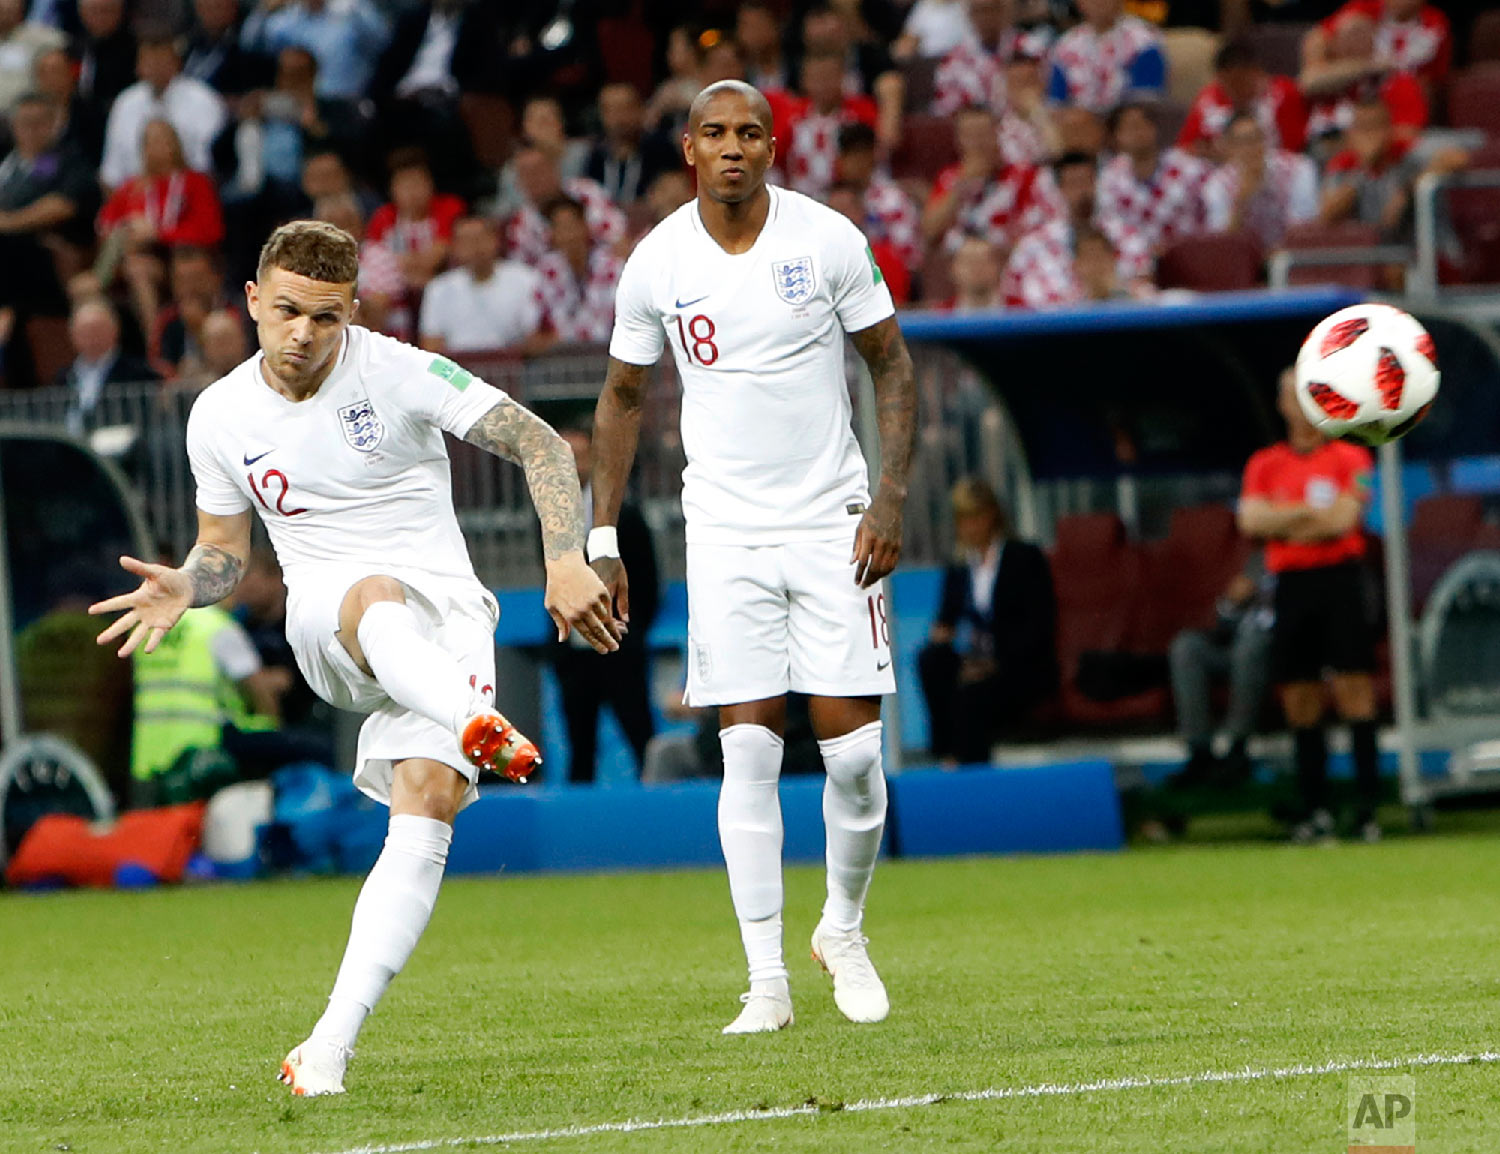  England's Kieran Trippier scores his side's opening goal during the semifinal match between Croatia and England at the 2018 soccer World Cup in the Luzhniki Stadium in, Moscow, Russia, Wednesday, July 11, 2018. (AP Photo/Alastair Grant) 